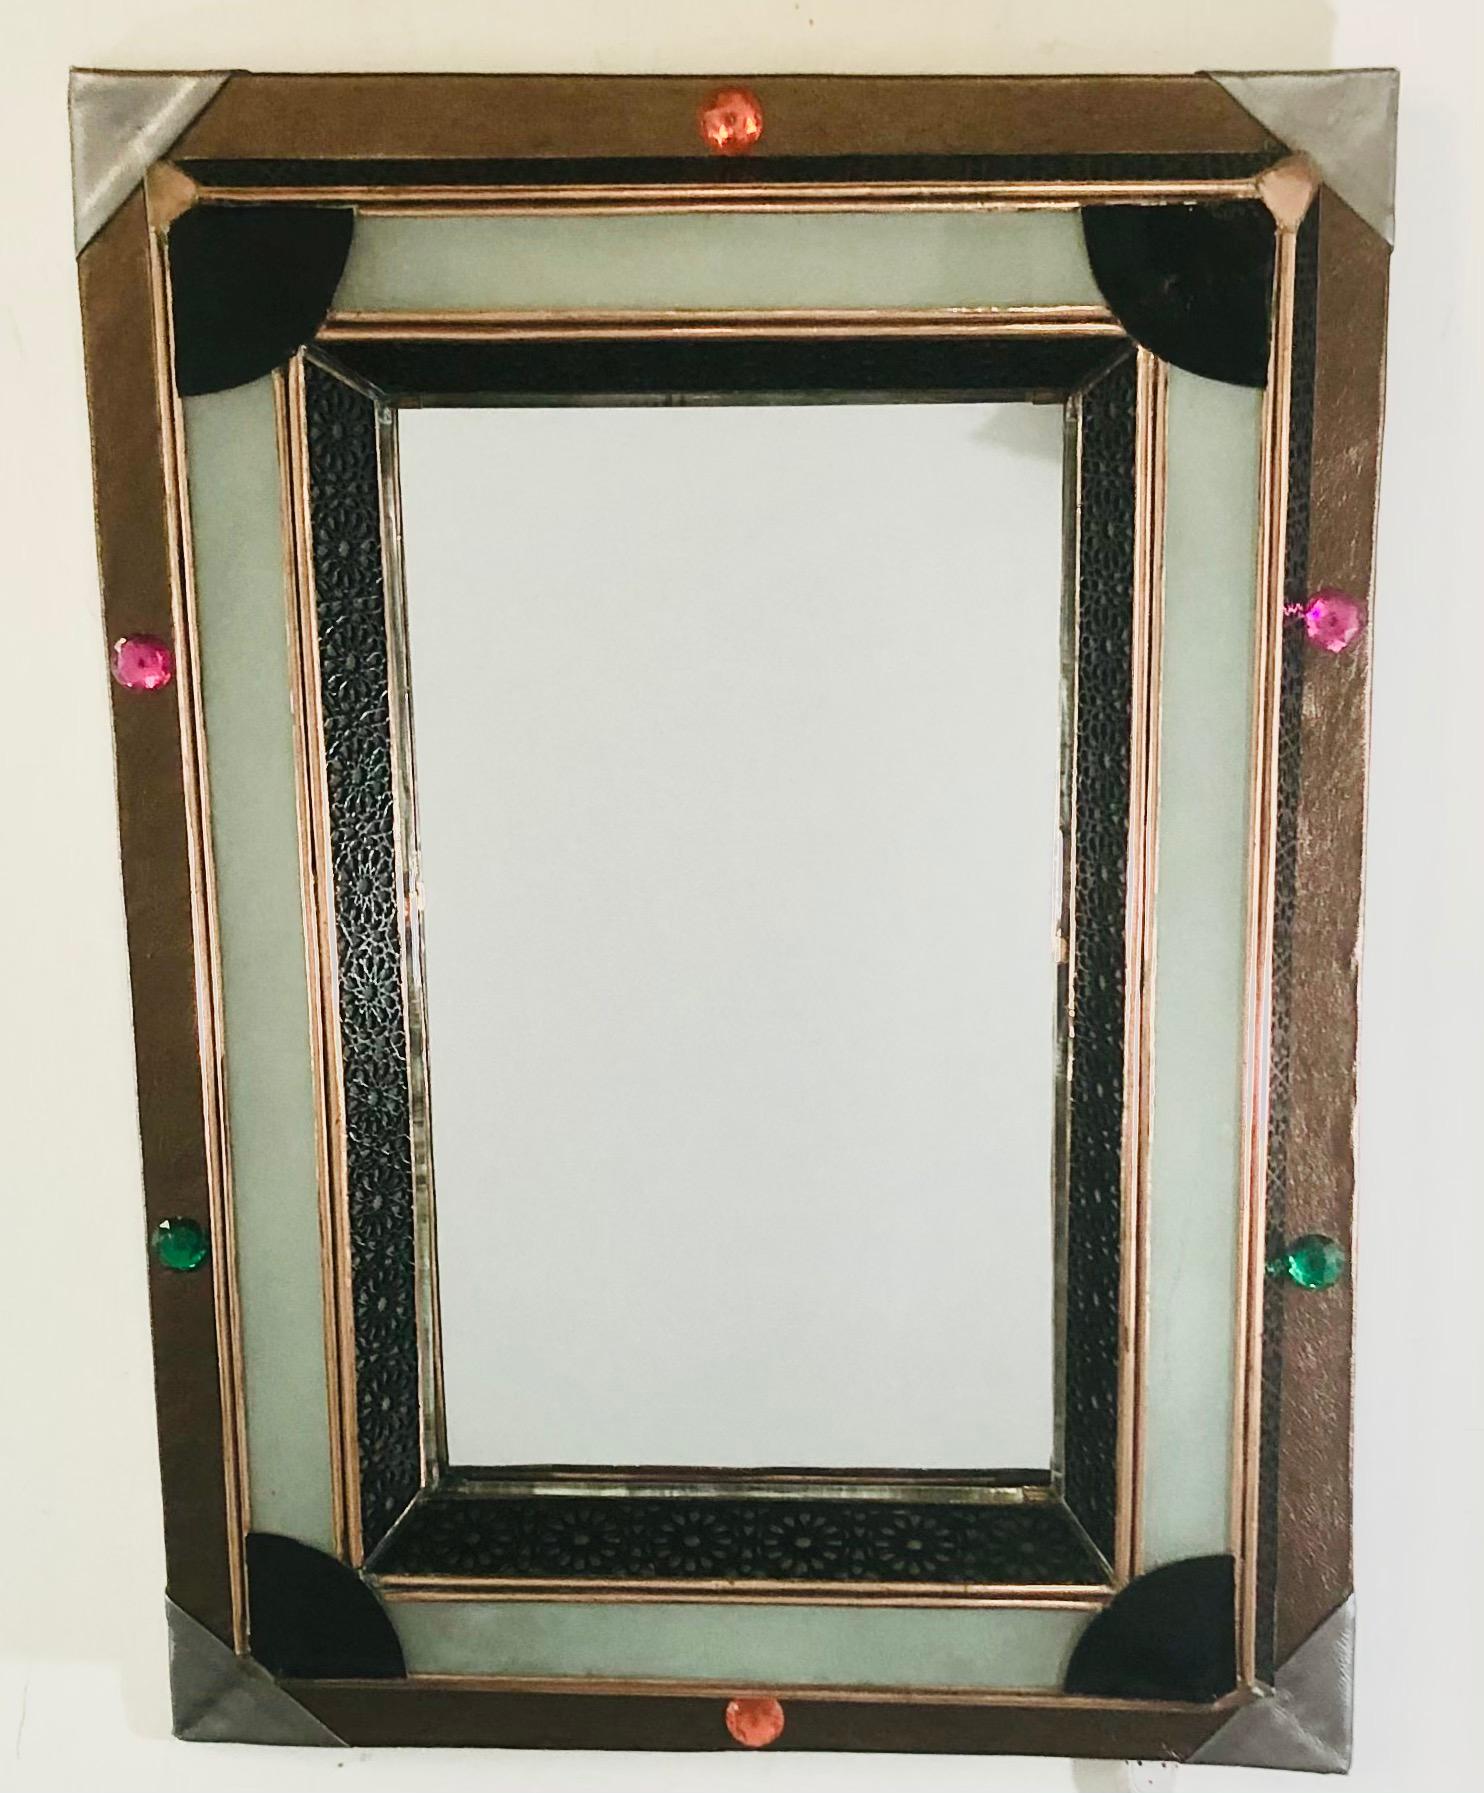 Lighted Art Deco Style Vanity Mirror or Wall Mirror
A delightful vanity or wall mirror featuring multicolored buttons and a faux leather frame. The mirror has a lighted milk glass frame that is wired. The faux leather shows beautiful geometrical